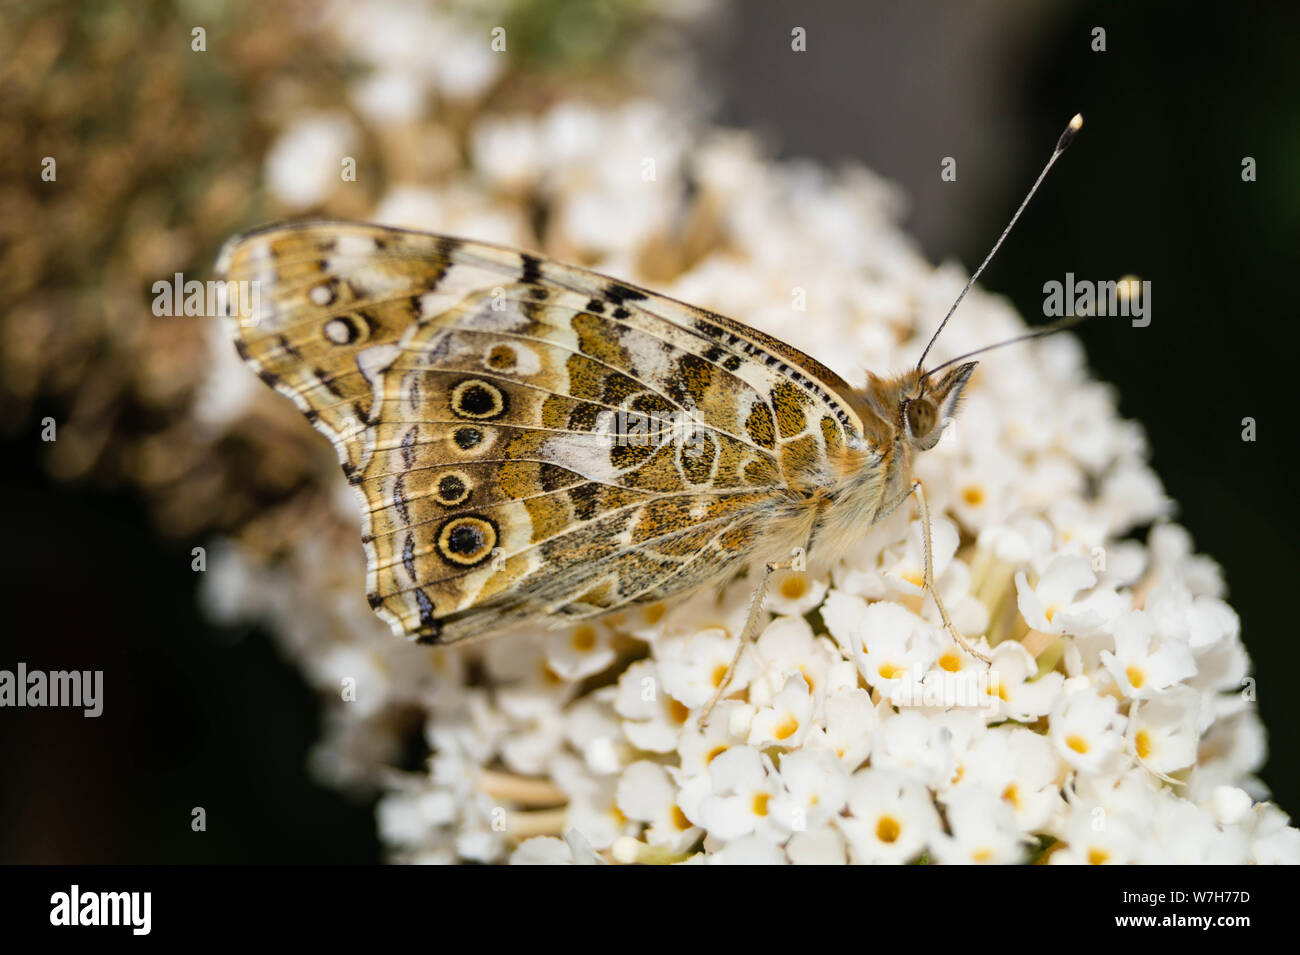 Butterfly Vanessa Cardui or Cynthia Cardui in the Garden Stock Photo